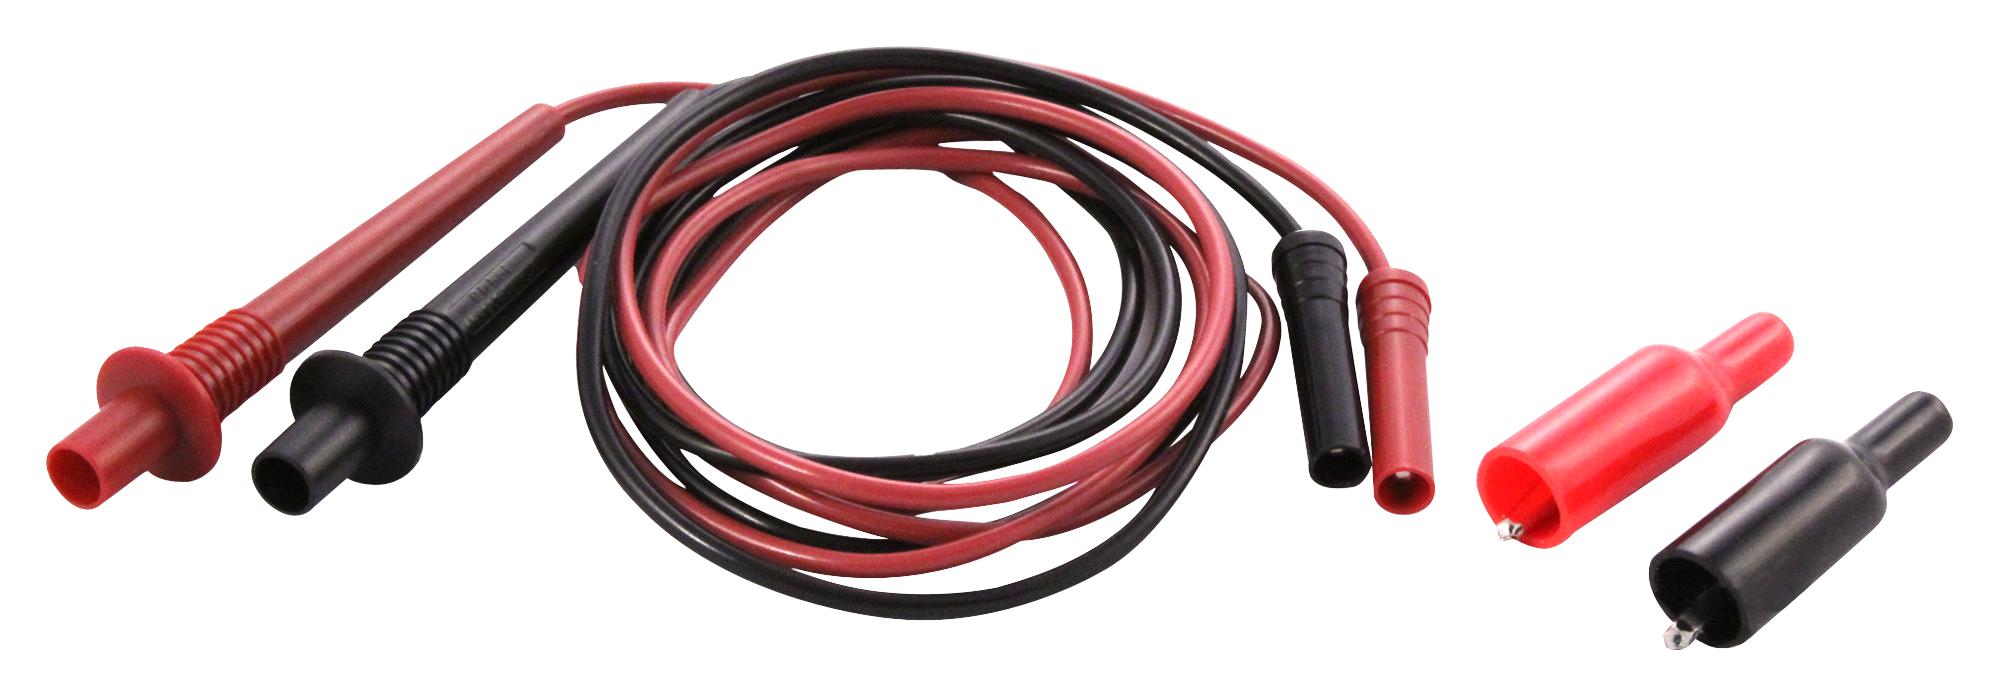 1754 SAFETY UNIVERSAL TEST LEAD KIT, DMM KEITHLEY